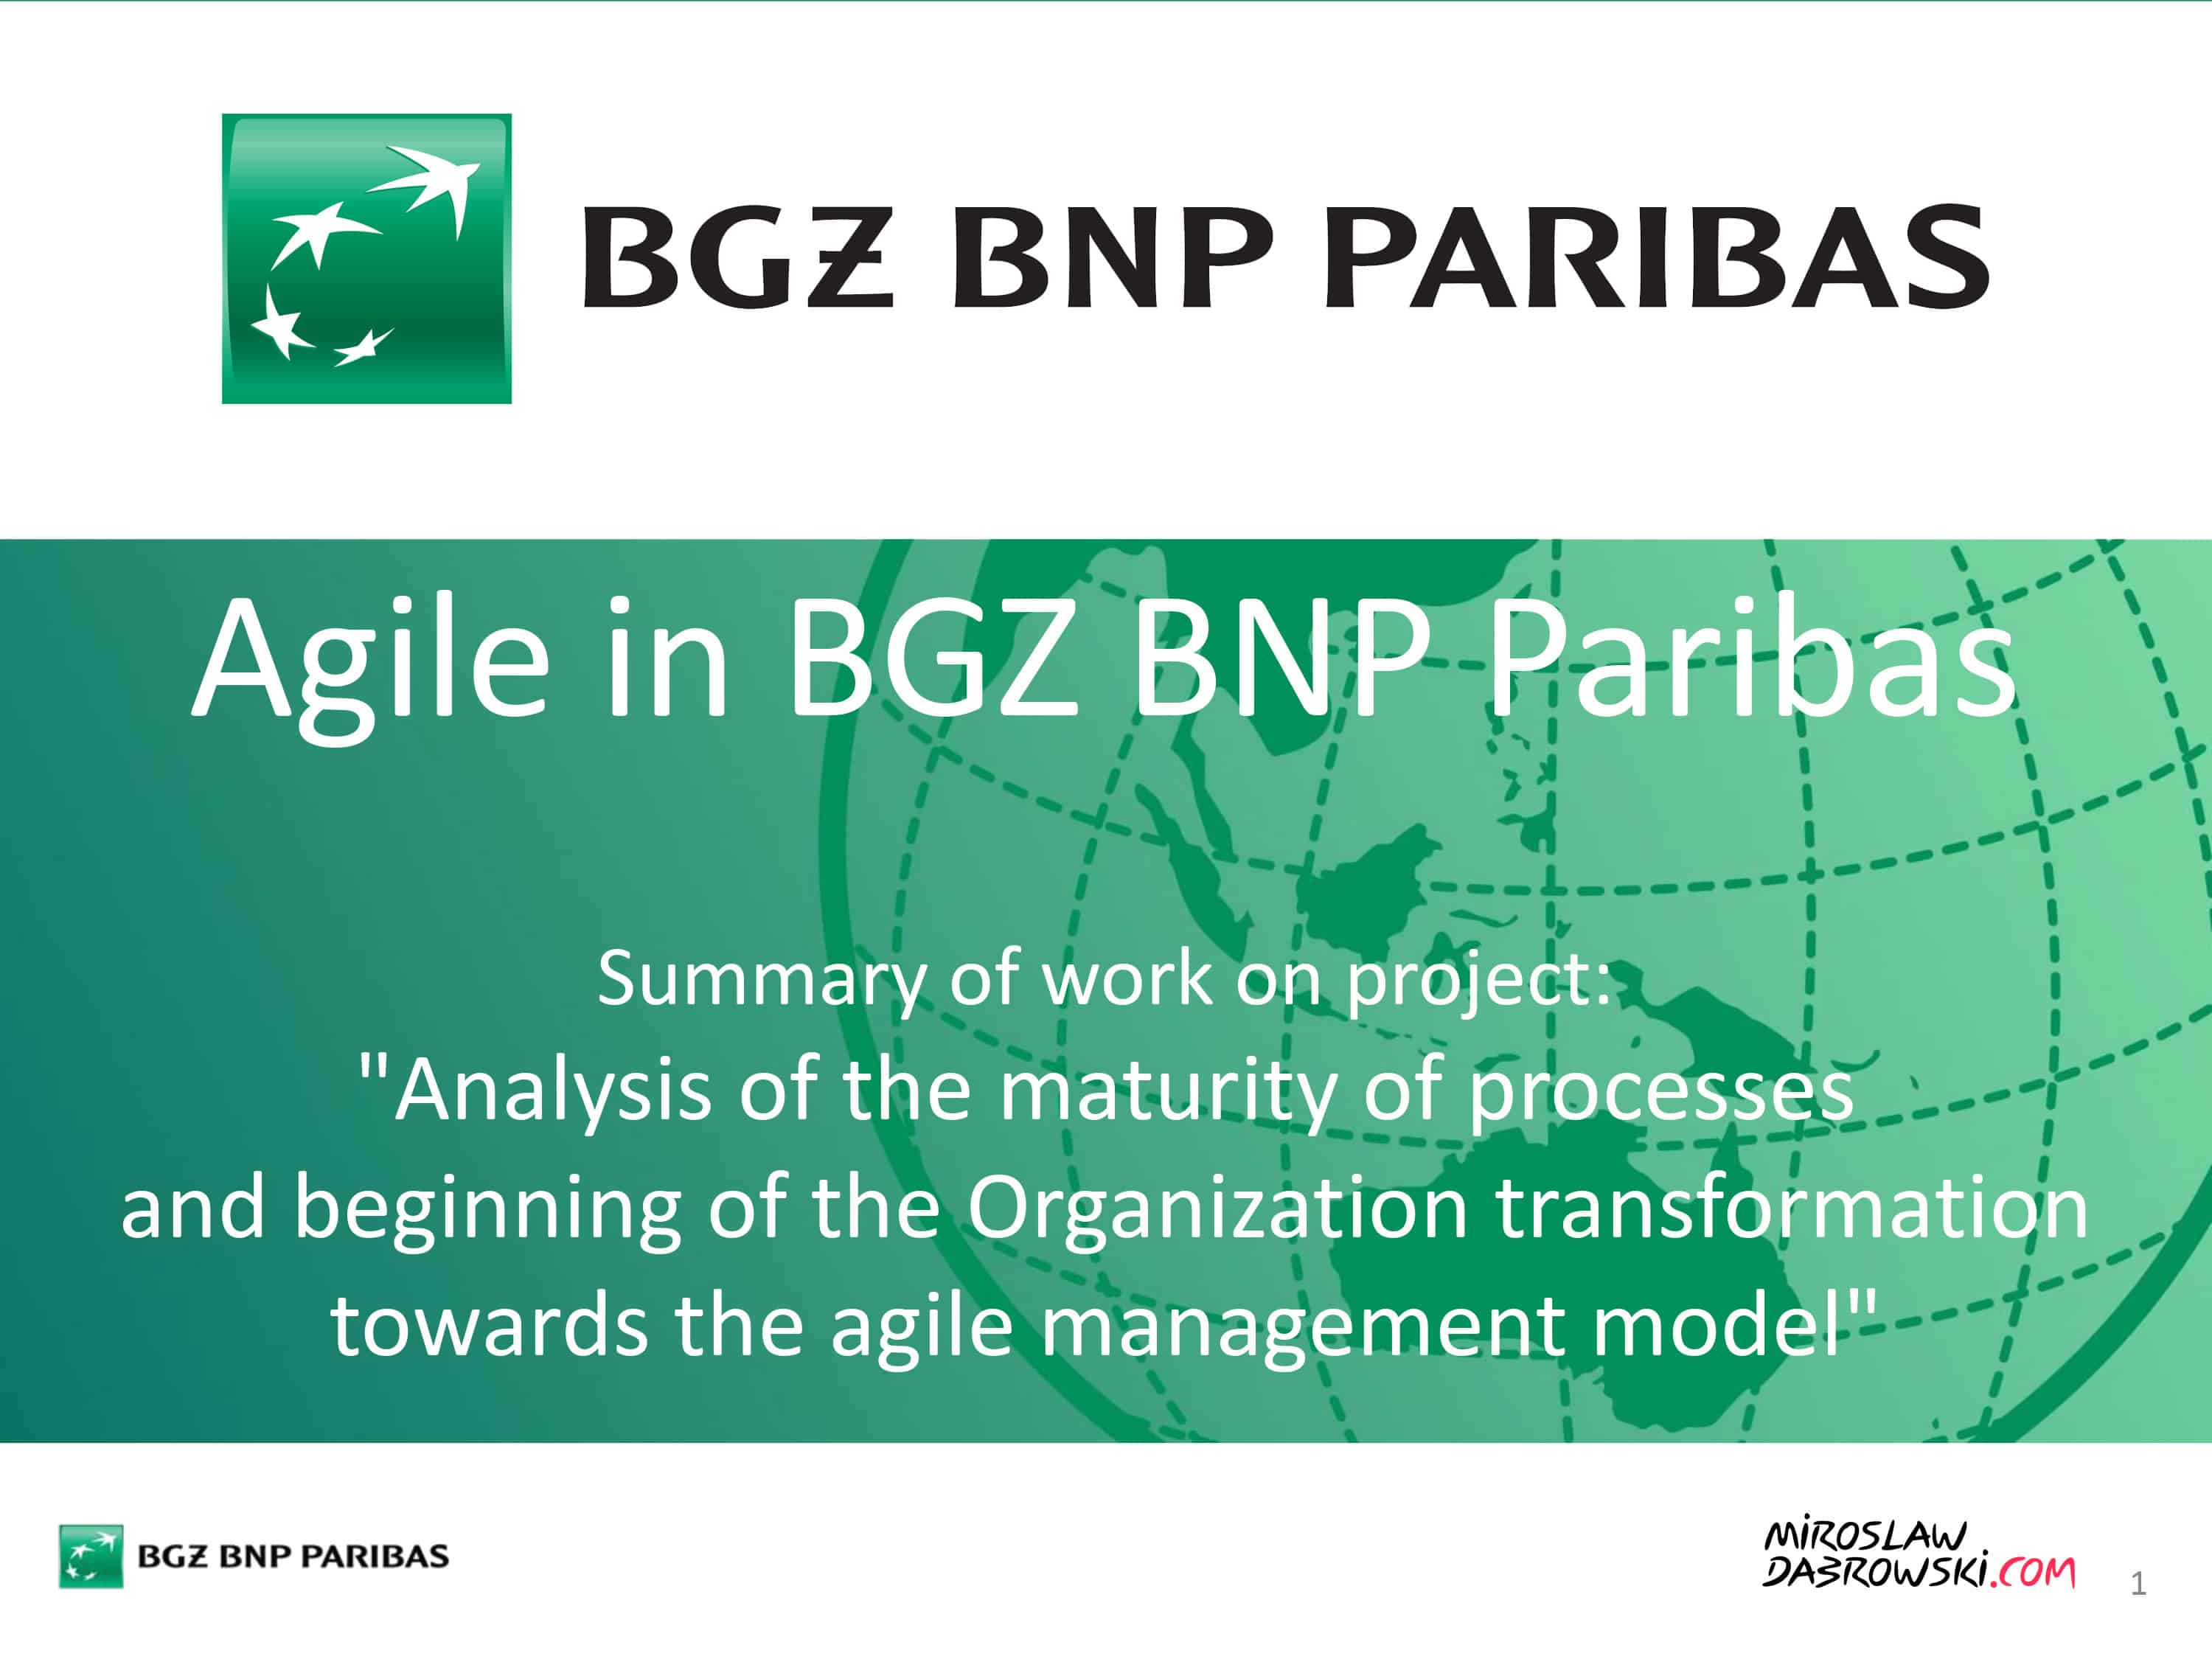 Agile in BGZ BNP Paribas - Bank Analysis of the maturity of processes and the beginning of the Organization transformation towards the agile management model